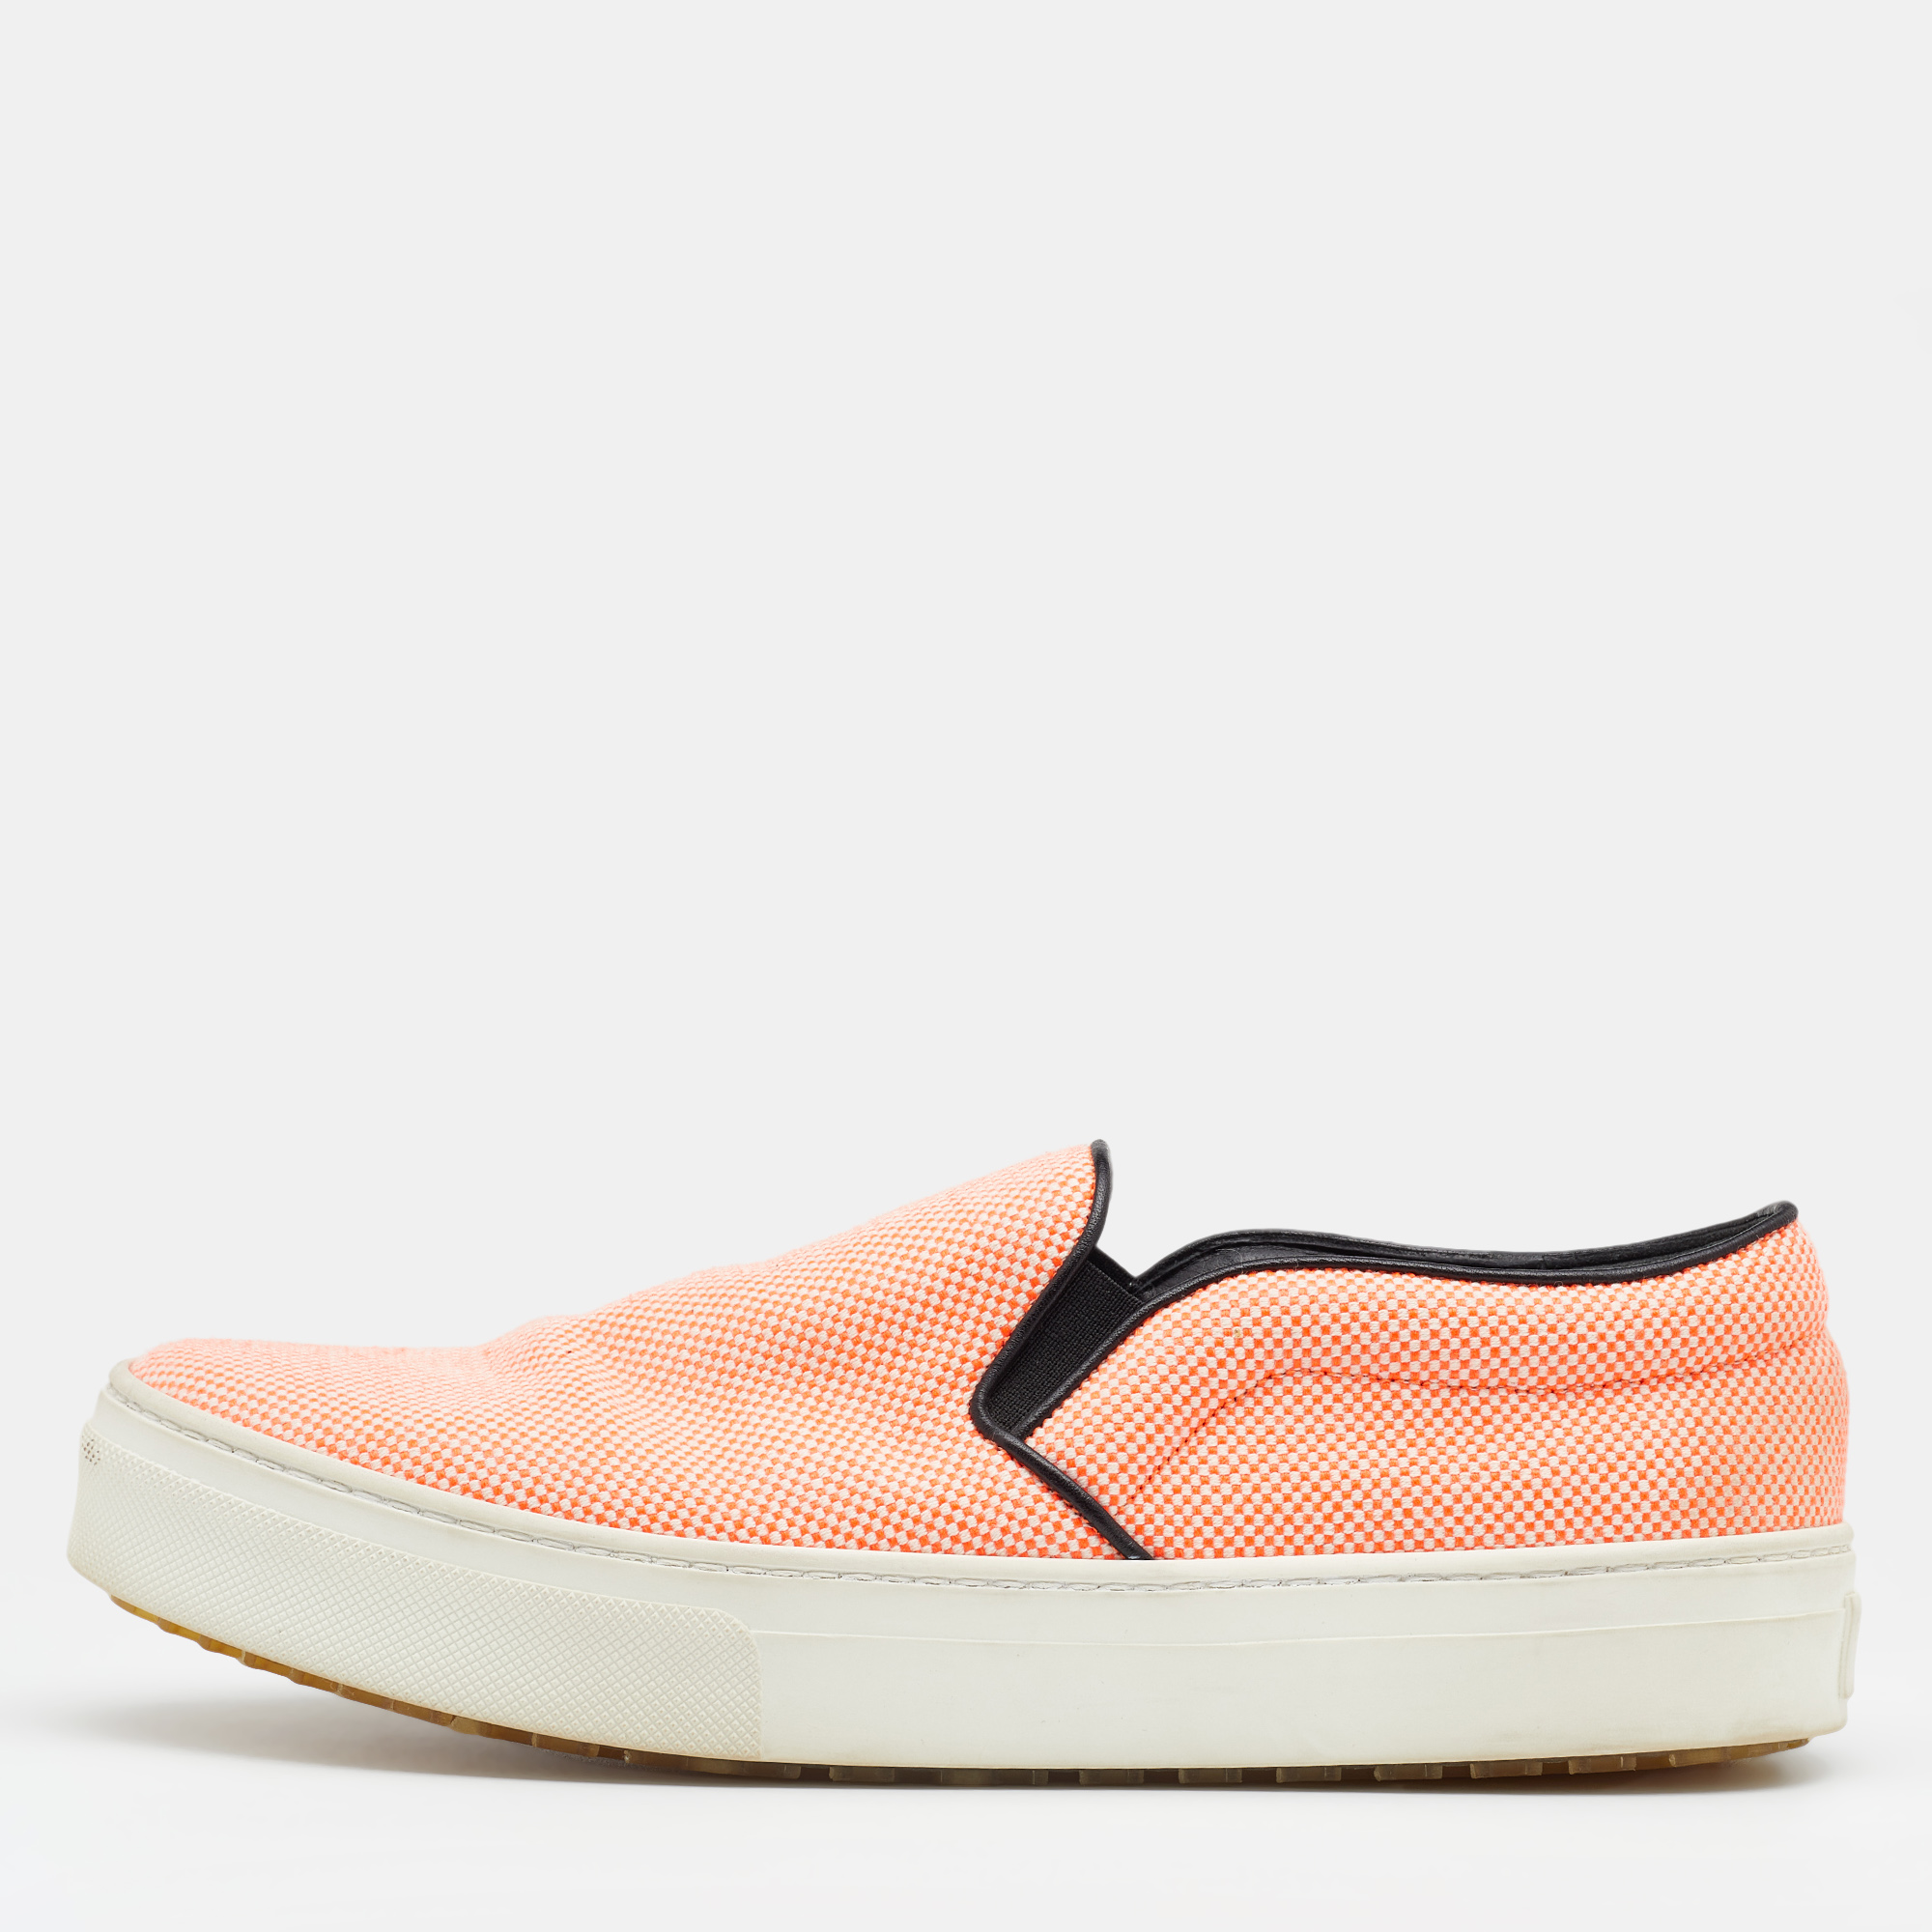 To accompany your attires with ease Celine brings you this pair of sneakers that speak nothing but comfort. Theyve been crafted from orange canvas and made ready with round toes leather insoles and rubber soles.